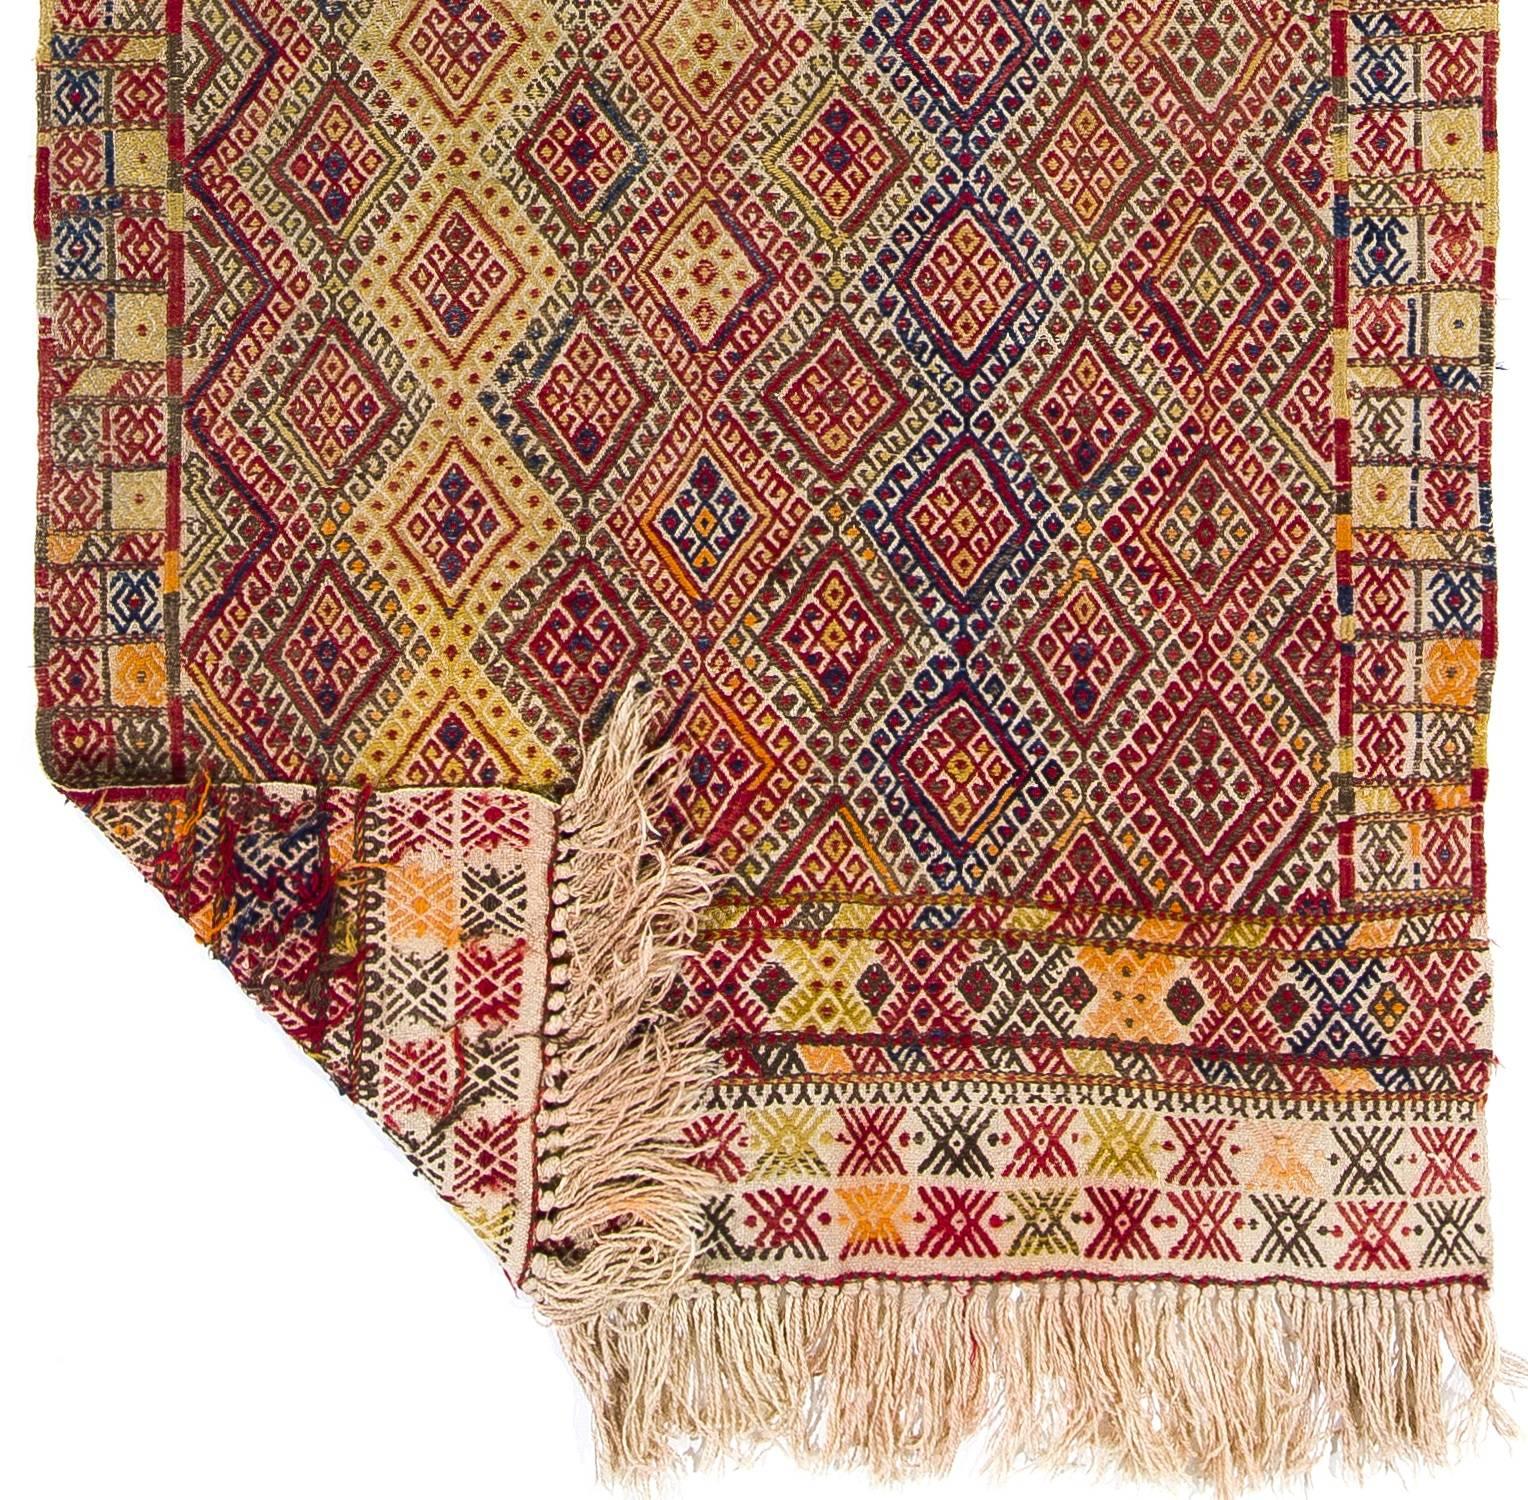 Hand-Woven 4.2x12.3 Ft Vintage Turkish Jijim Runner, Handmade Colorful Flat-woven Wool Rug For Sale